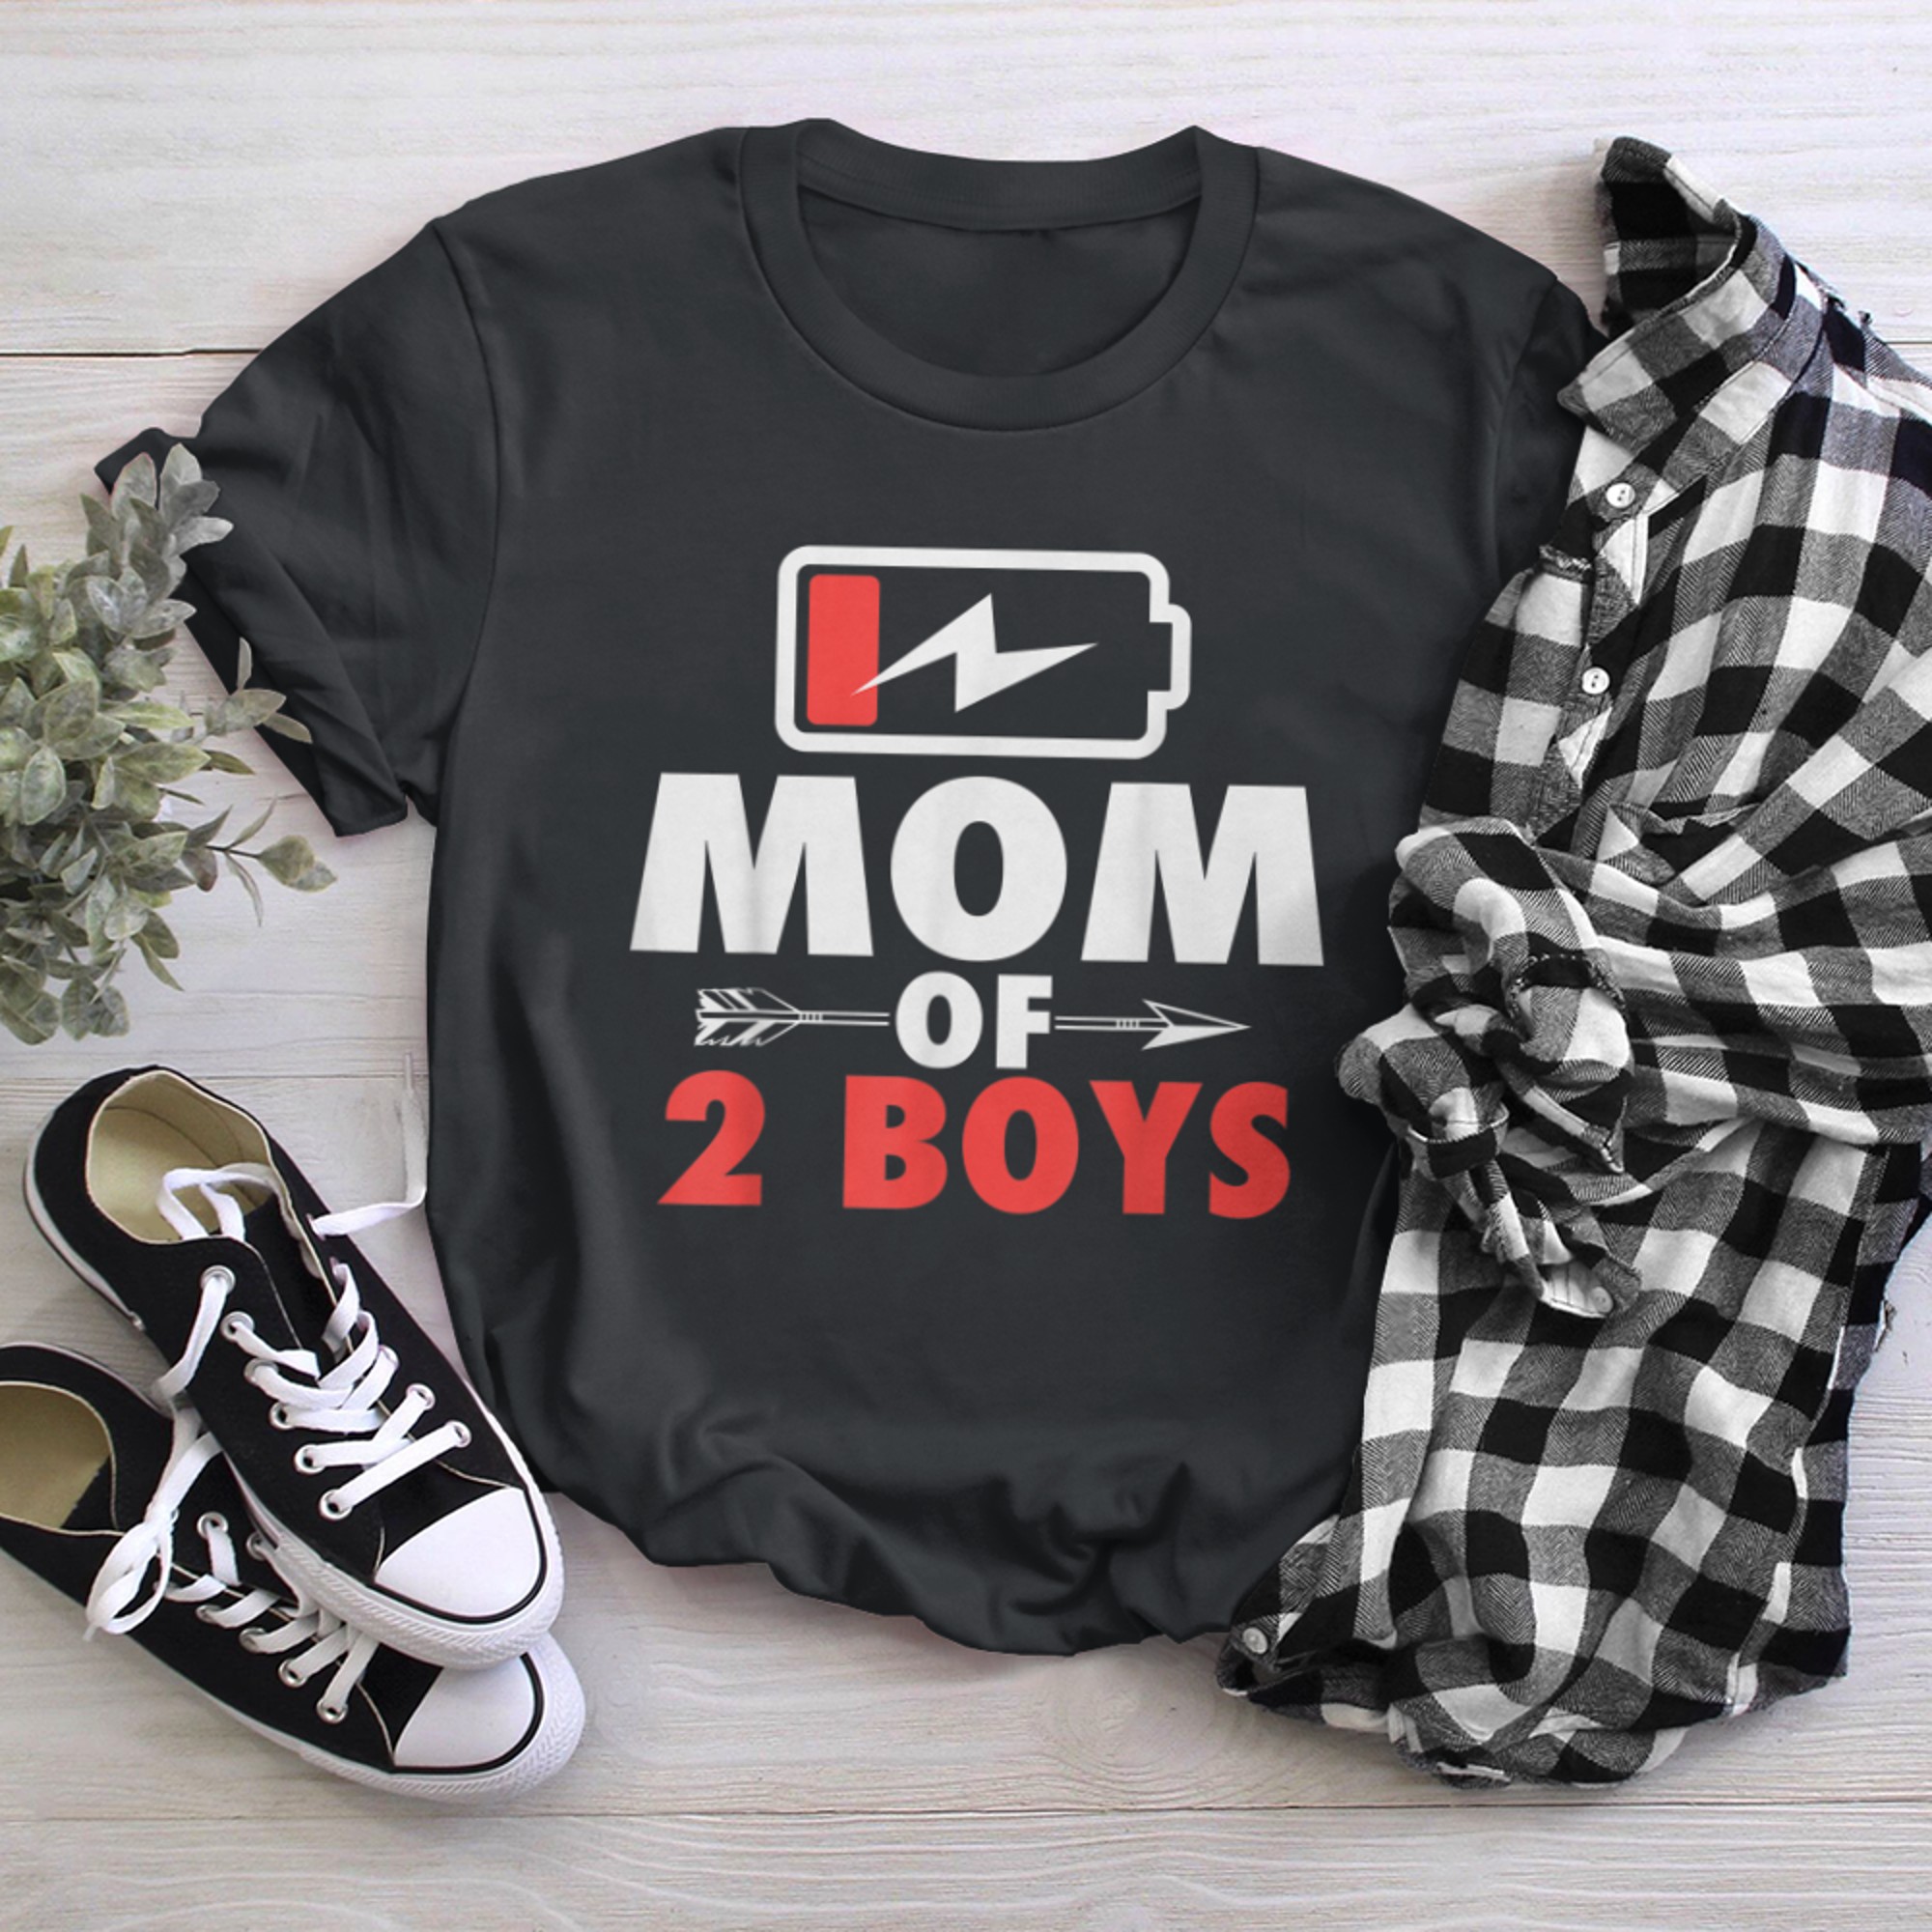 Mom of from Son Mothers Day Birthday (8) t-shirt black